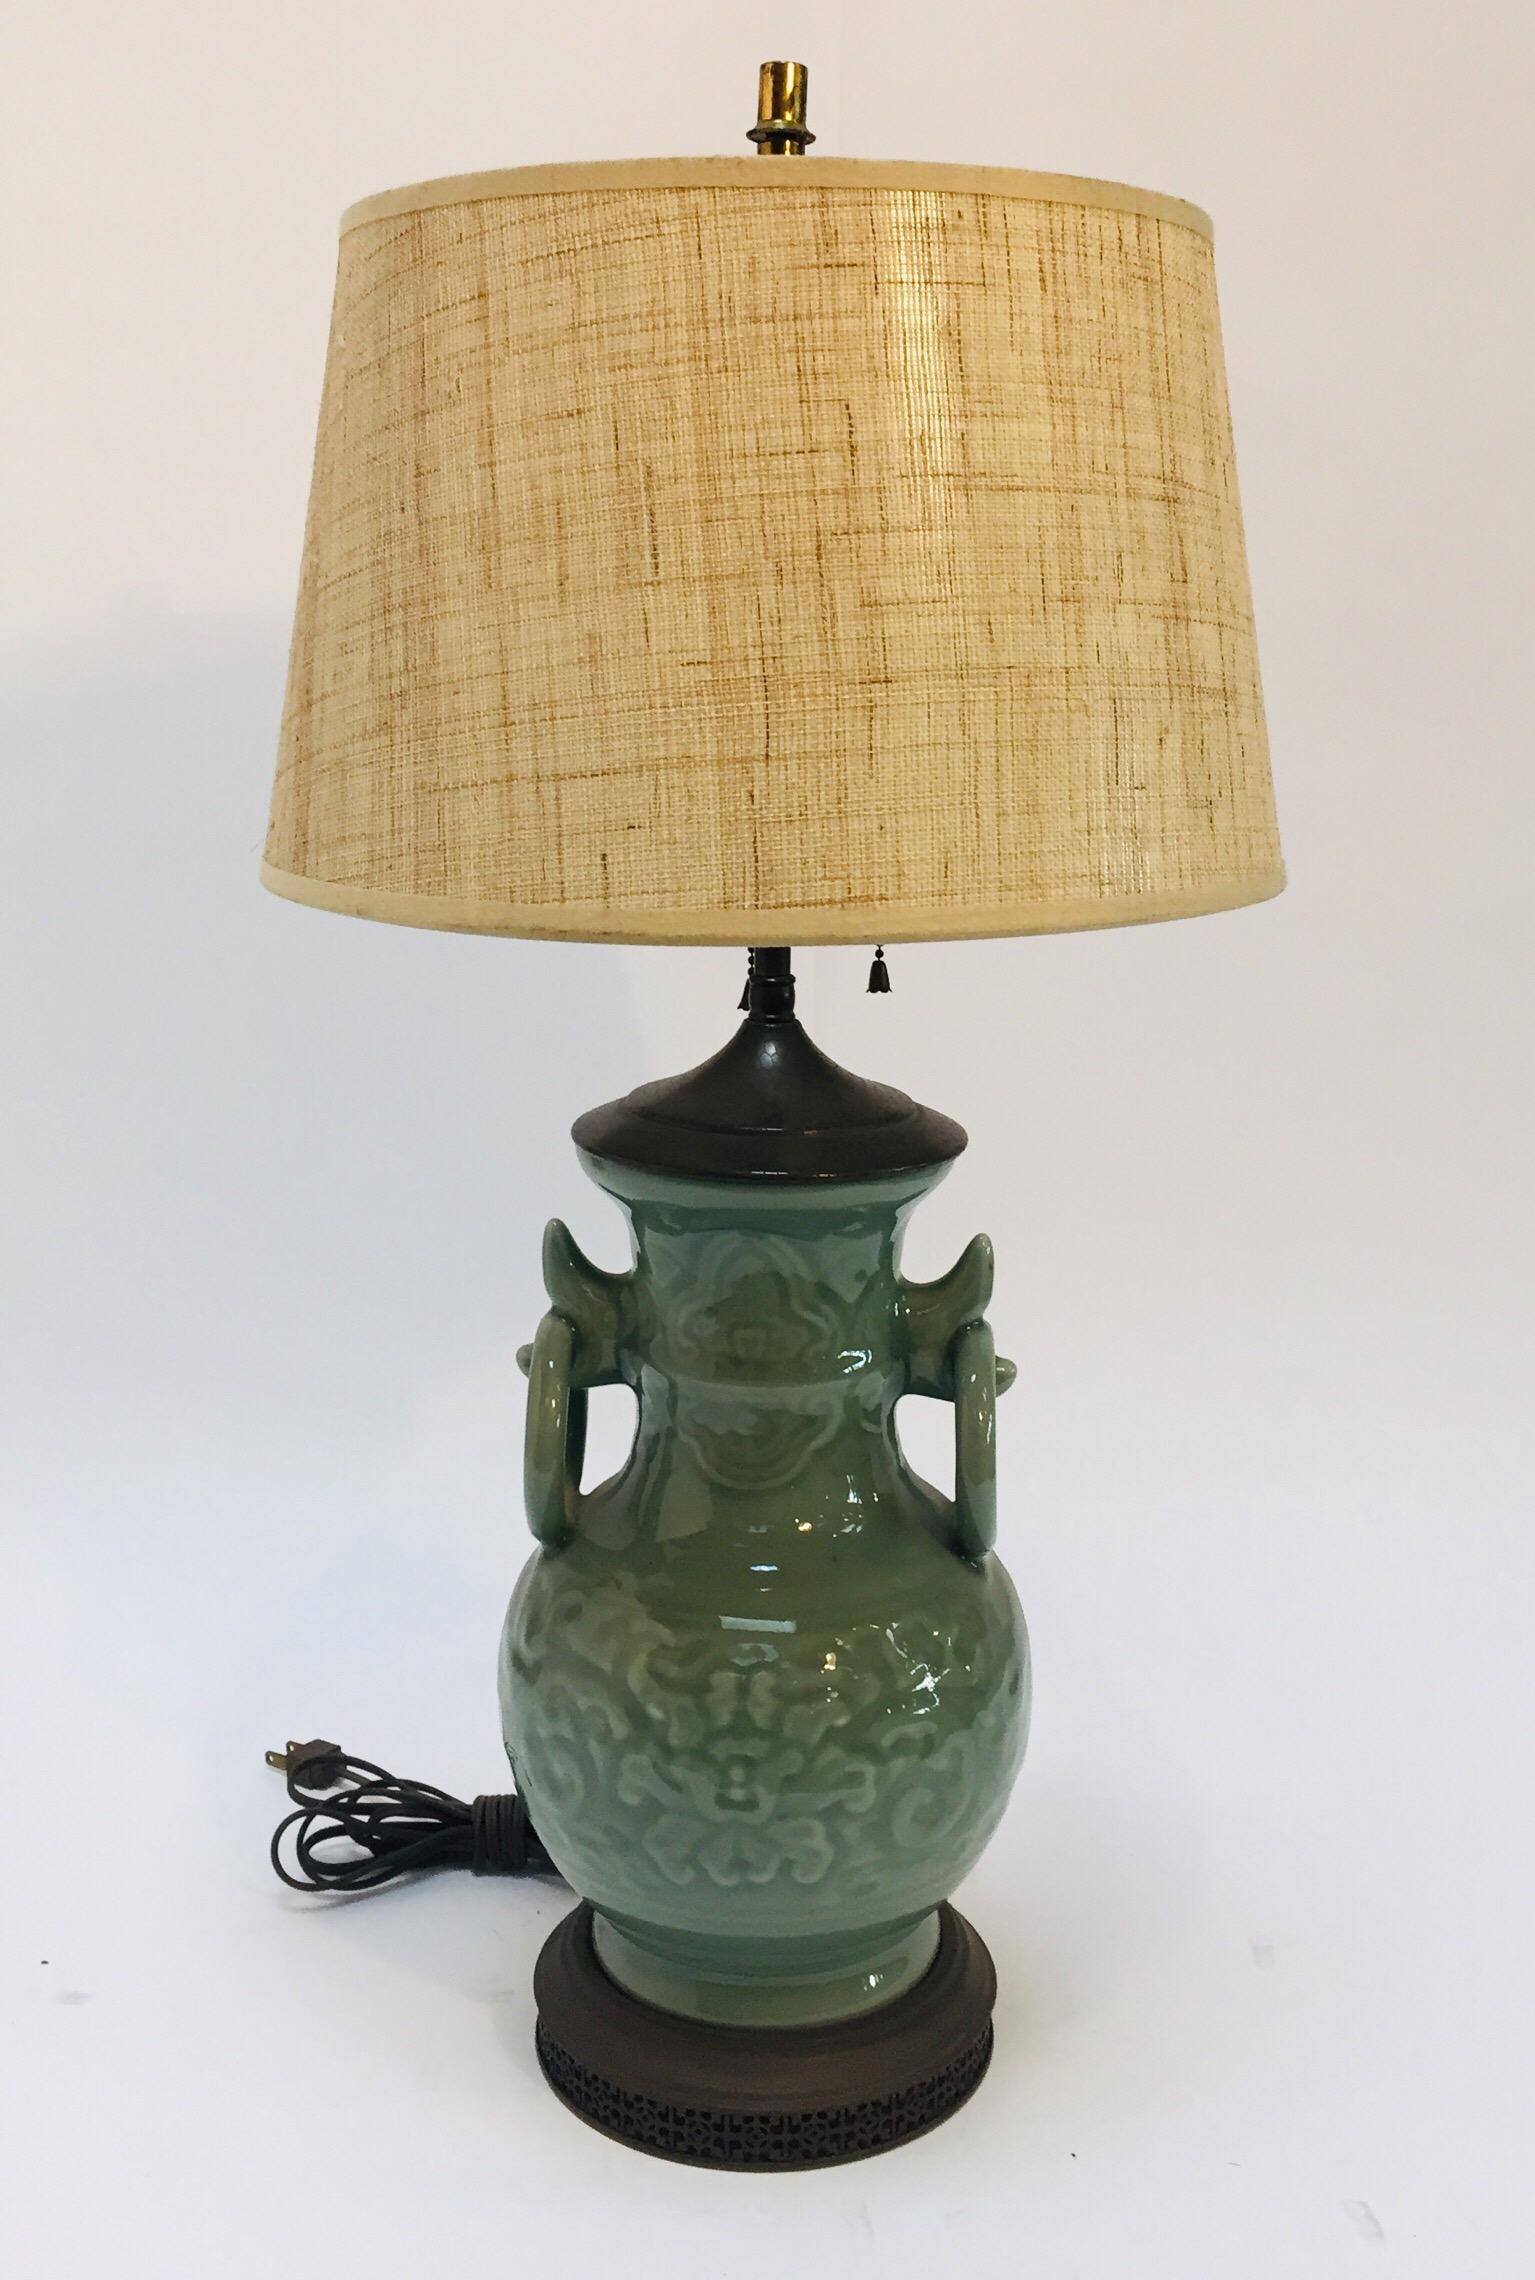 Vintage Asian oriental Chinese glazed jade green light celadon color with raised relief flowers handled vase porcelain lamp.
This beautiful piece is timeless in style.
Mounted on metal darkened base with Chinese cutouts designs.
The jar with